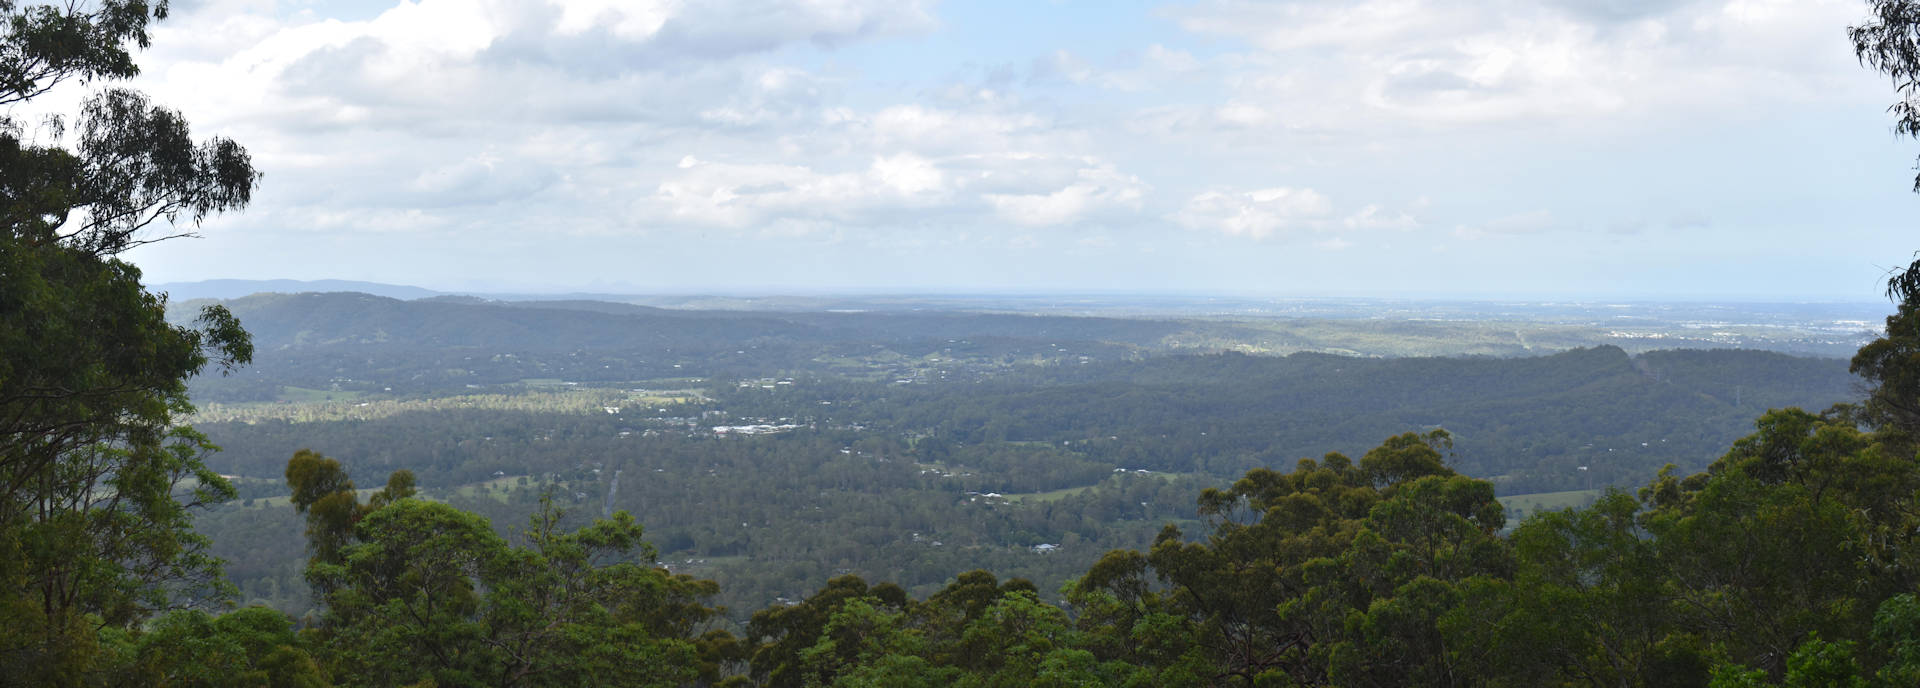 View from the main lookout at Camp Mountain on the Mt Nebo Tourist Drive